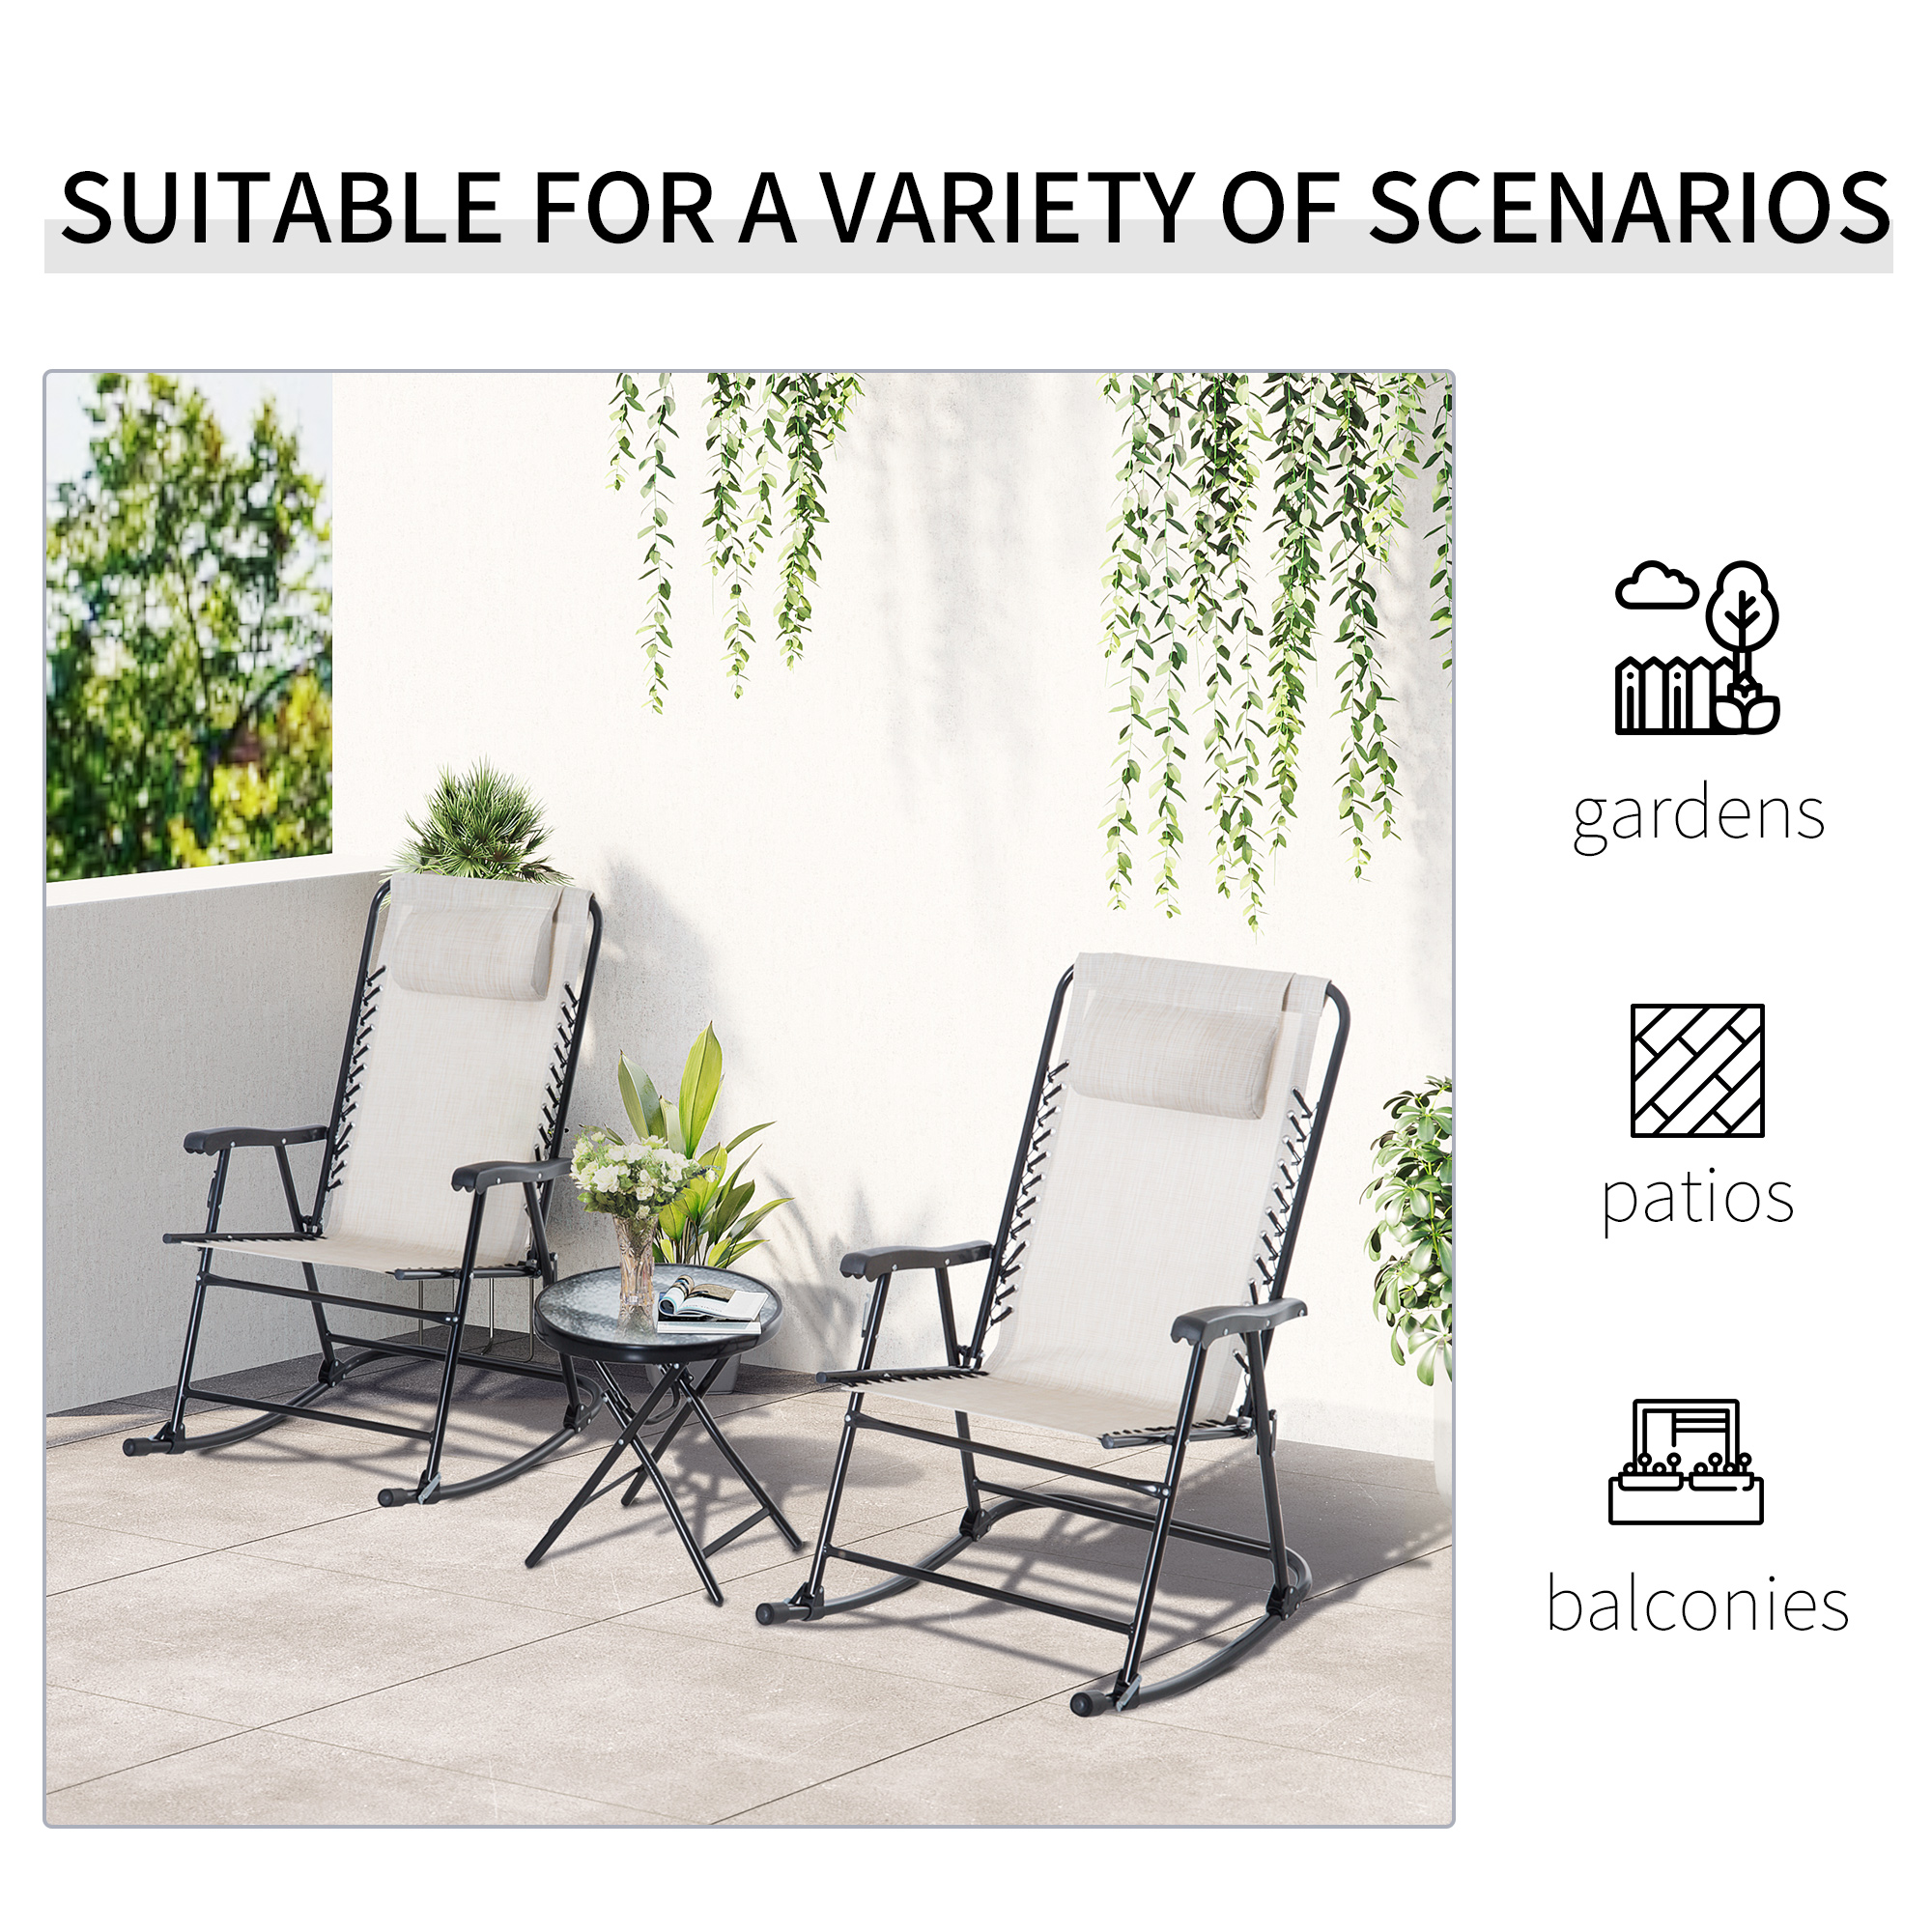 Outsunny 3 Piece Outdoor Rocking Chair Set, Patio Folding Lawn Rocker Set with Glass Coffee Table, Headrests for Yard, Patio, Deck, Backyard, Cream White - image 4 of 9